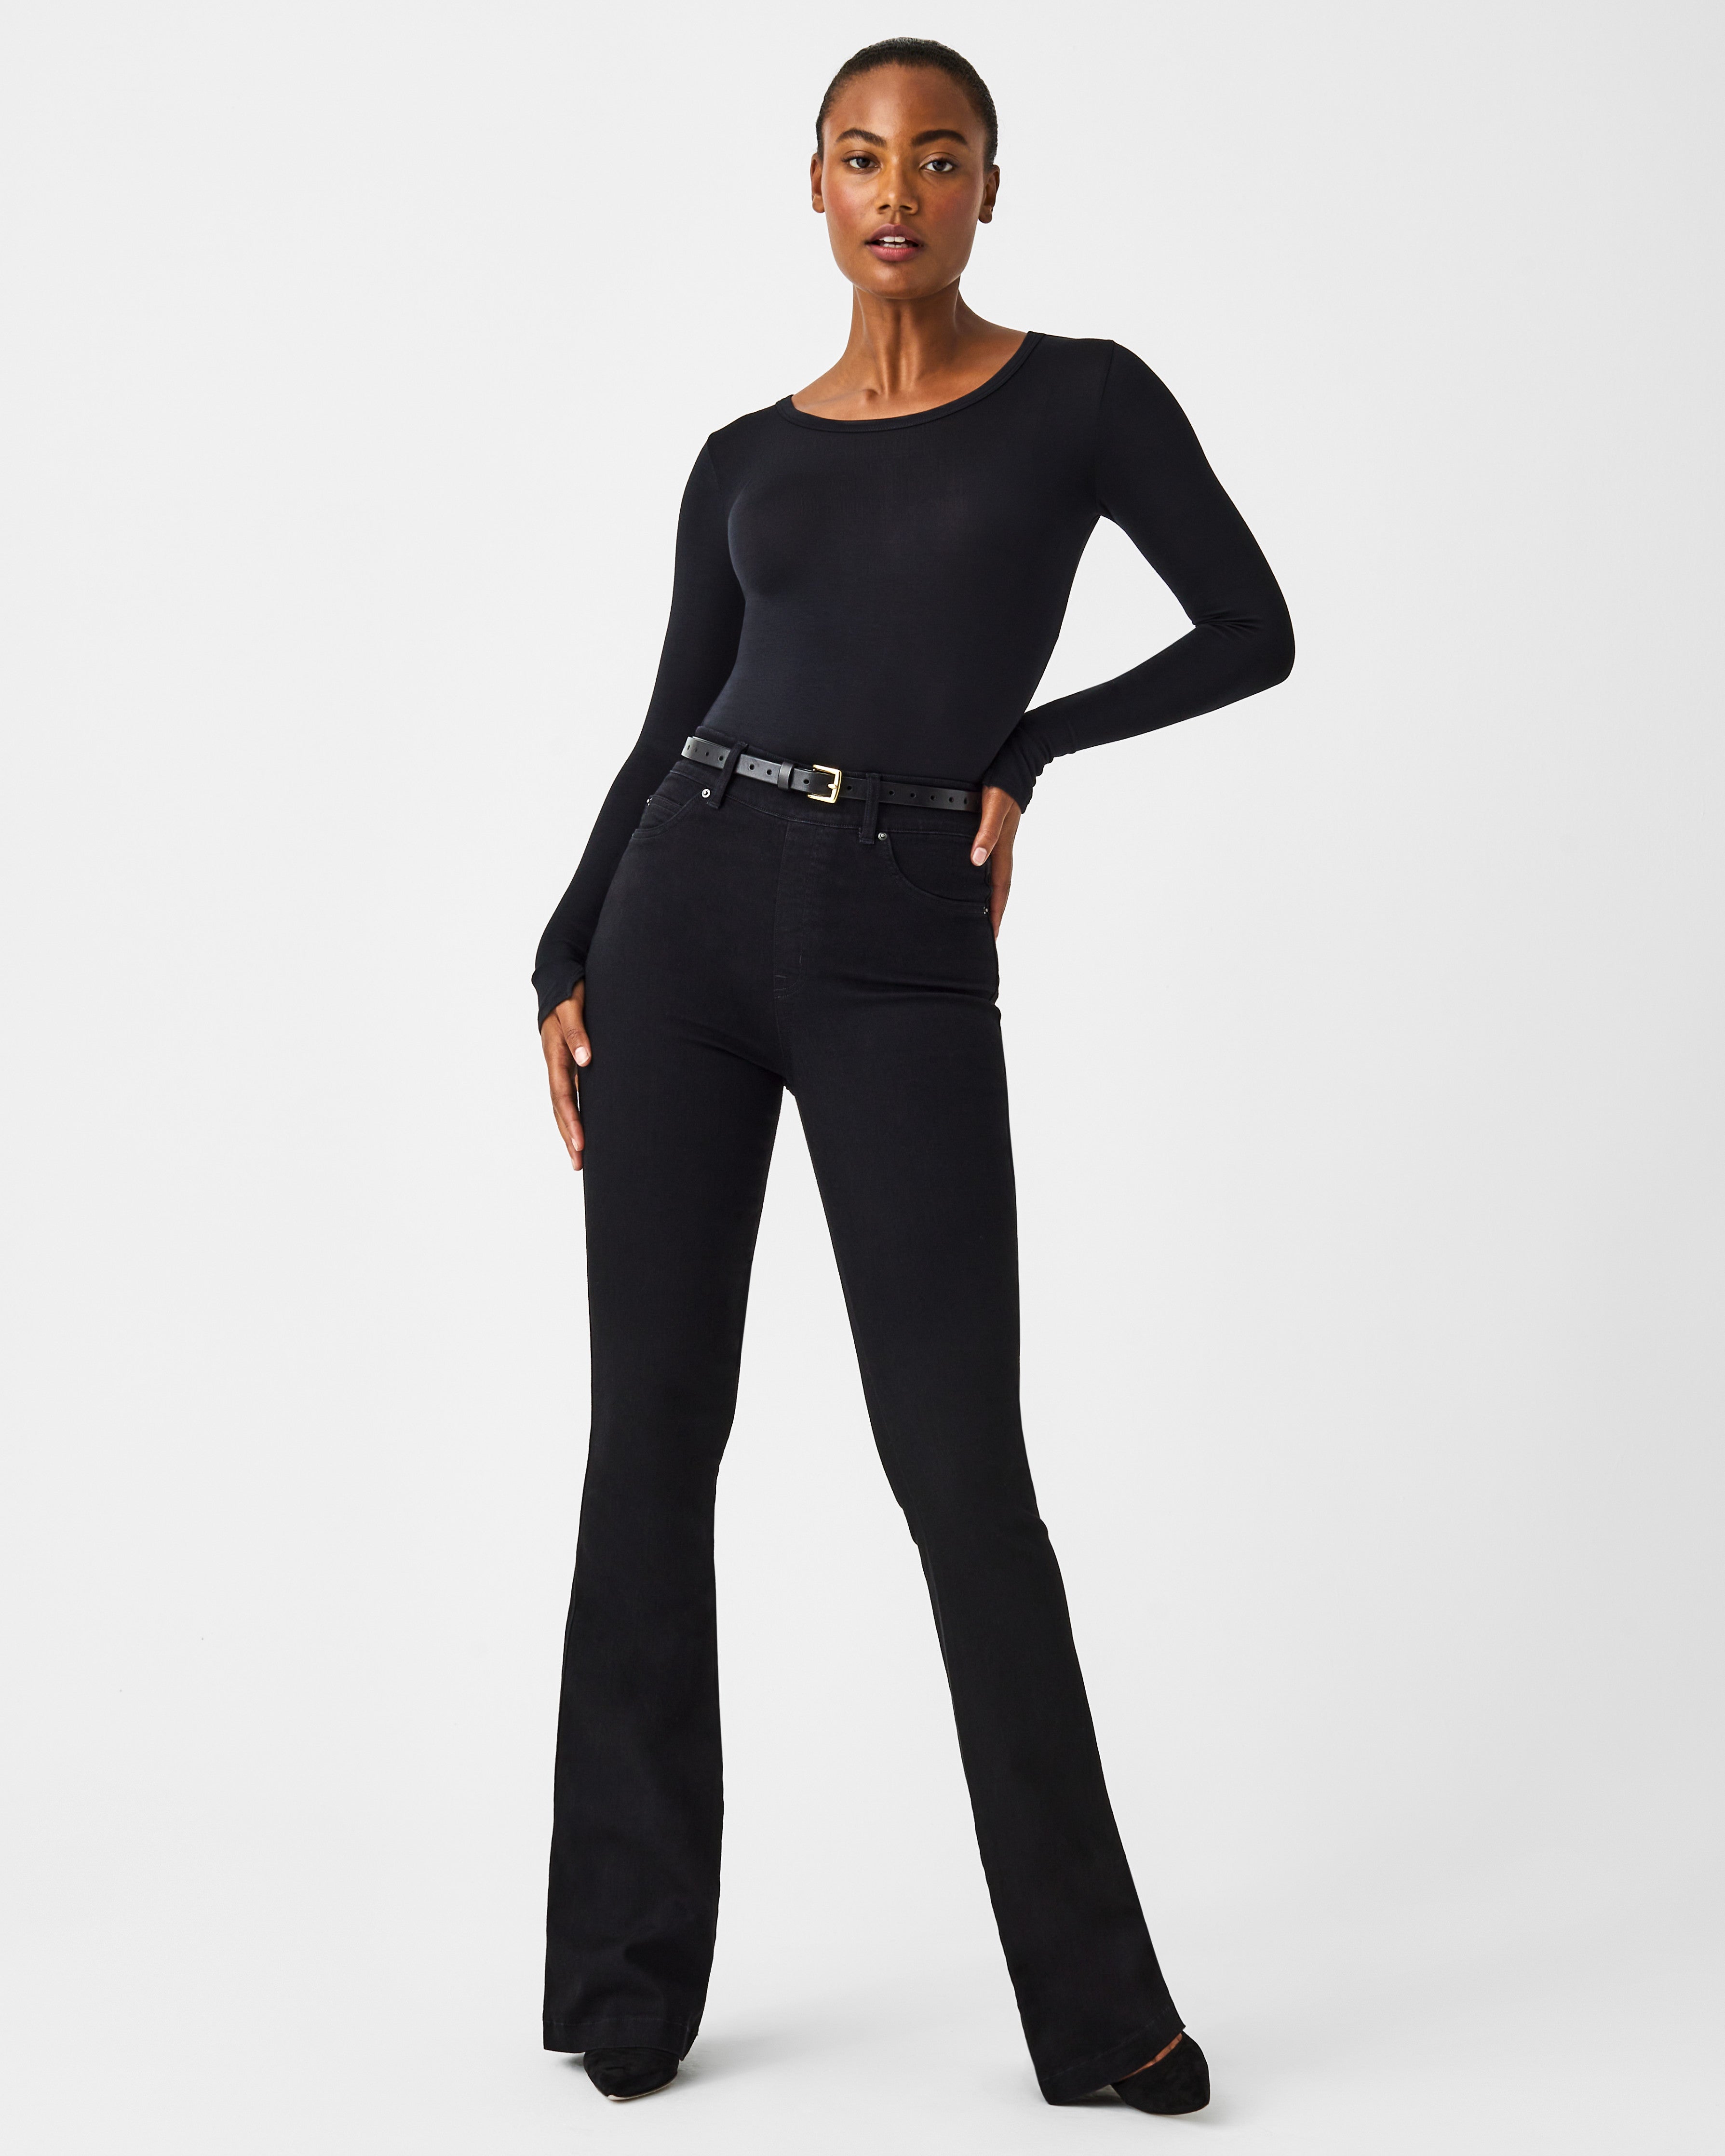 NEW Spanx The Perfect Black Pant Crop Flare Pants - 20260R - Black - XS